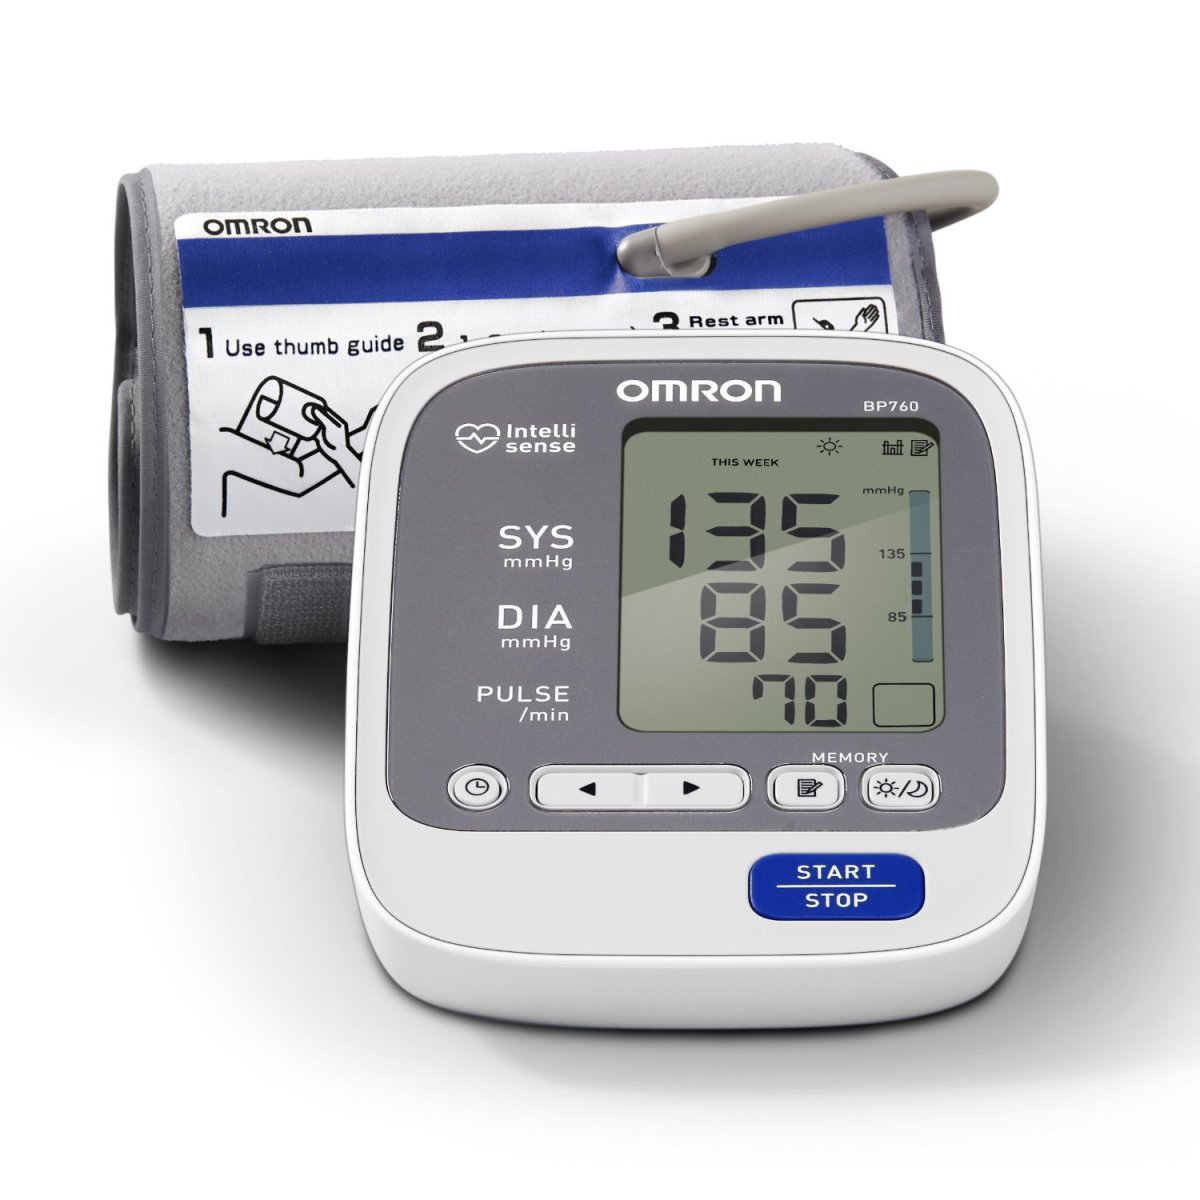 This Omron automatic blood pressure monitor is similar to the one I use at home.